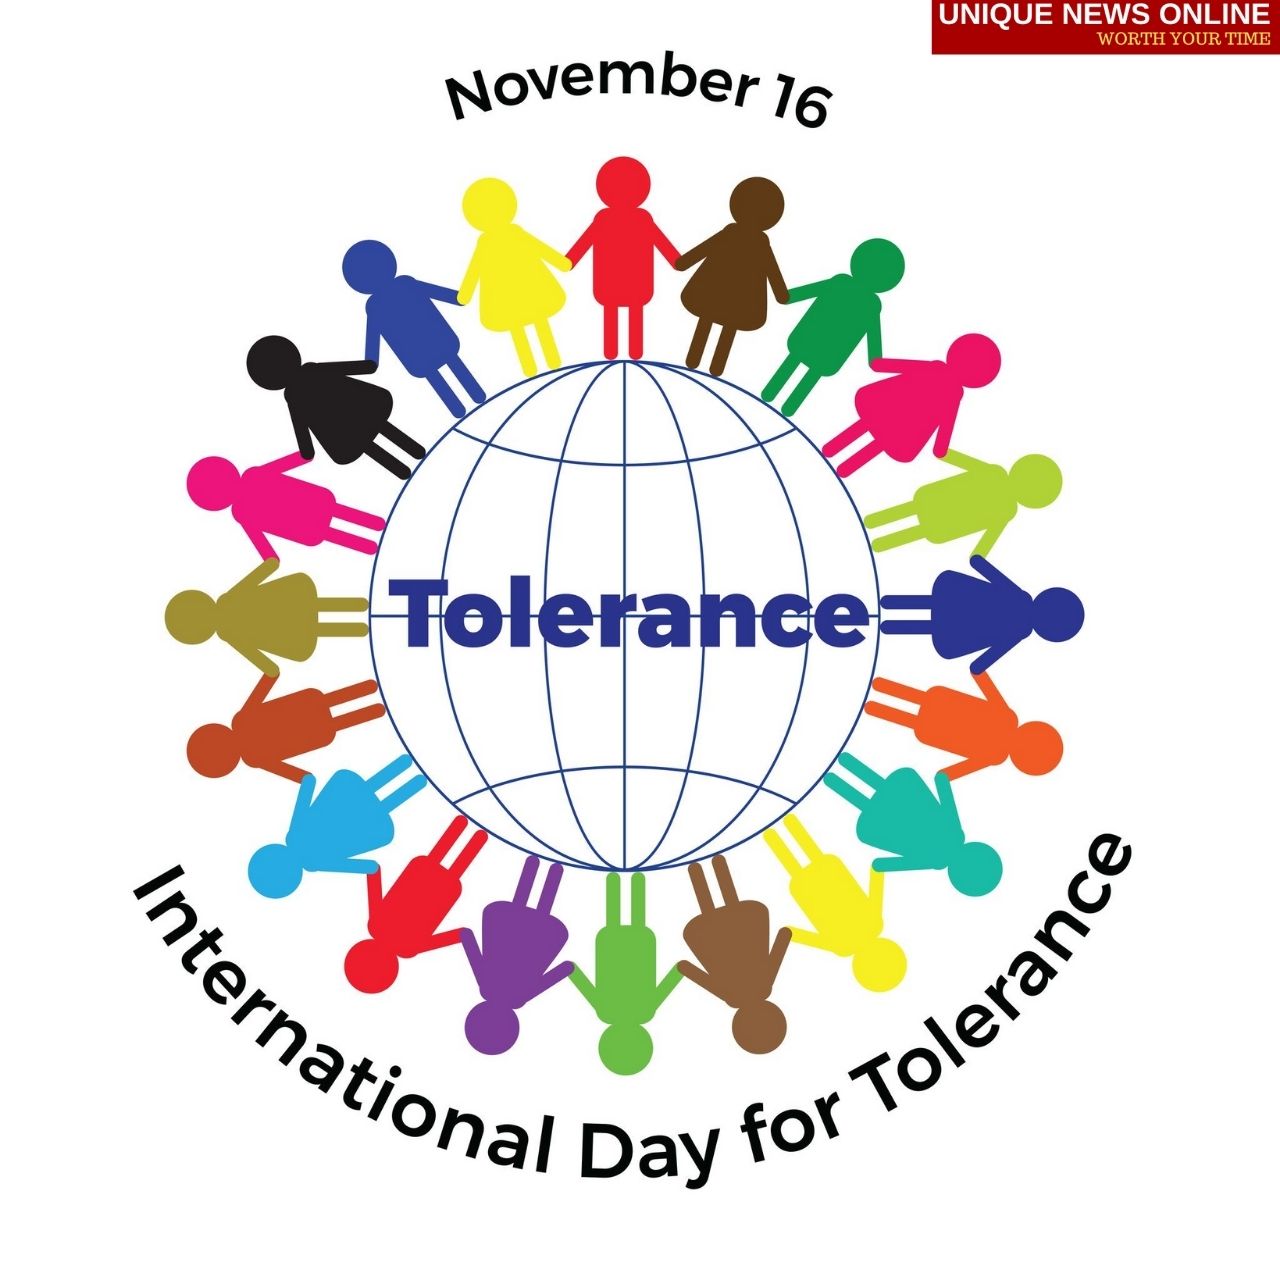 International Day for Tolerance 2021 Quotes, HD Images, Slogans, Messages, and Poster to create awareness